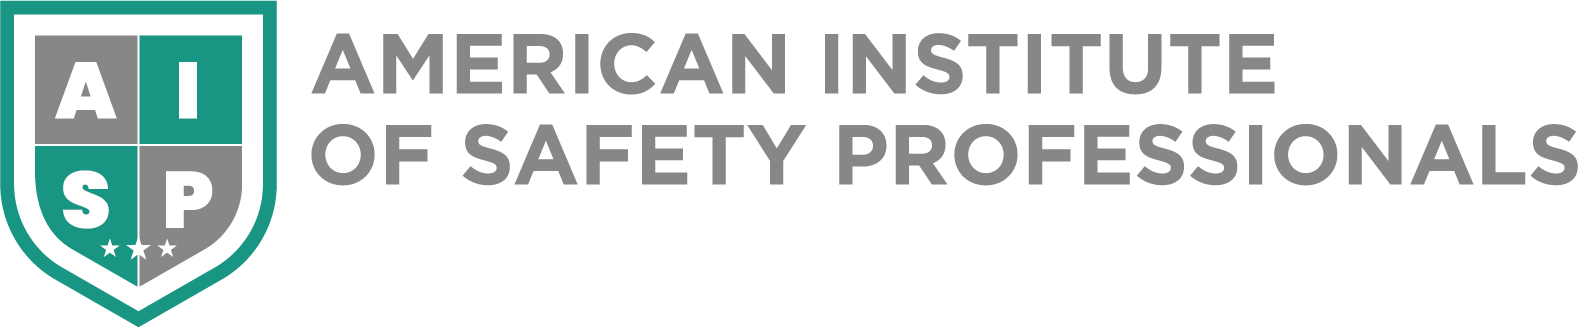 American Institute of Safety Professionals LLC - American Institute of safety professional